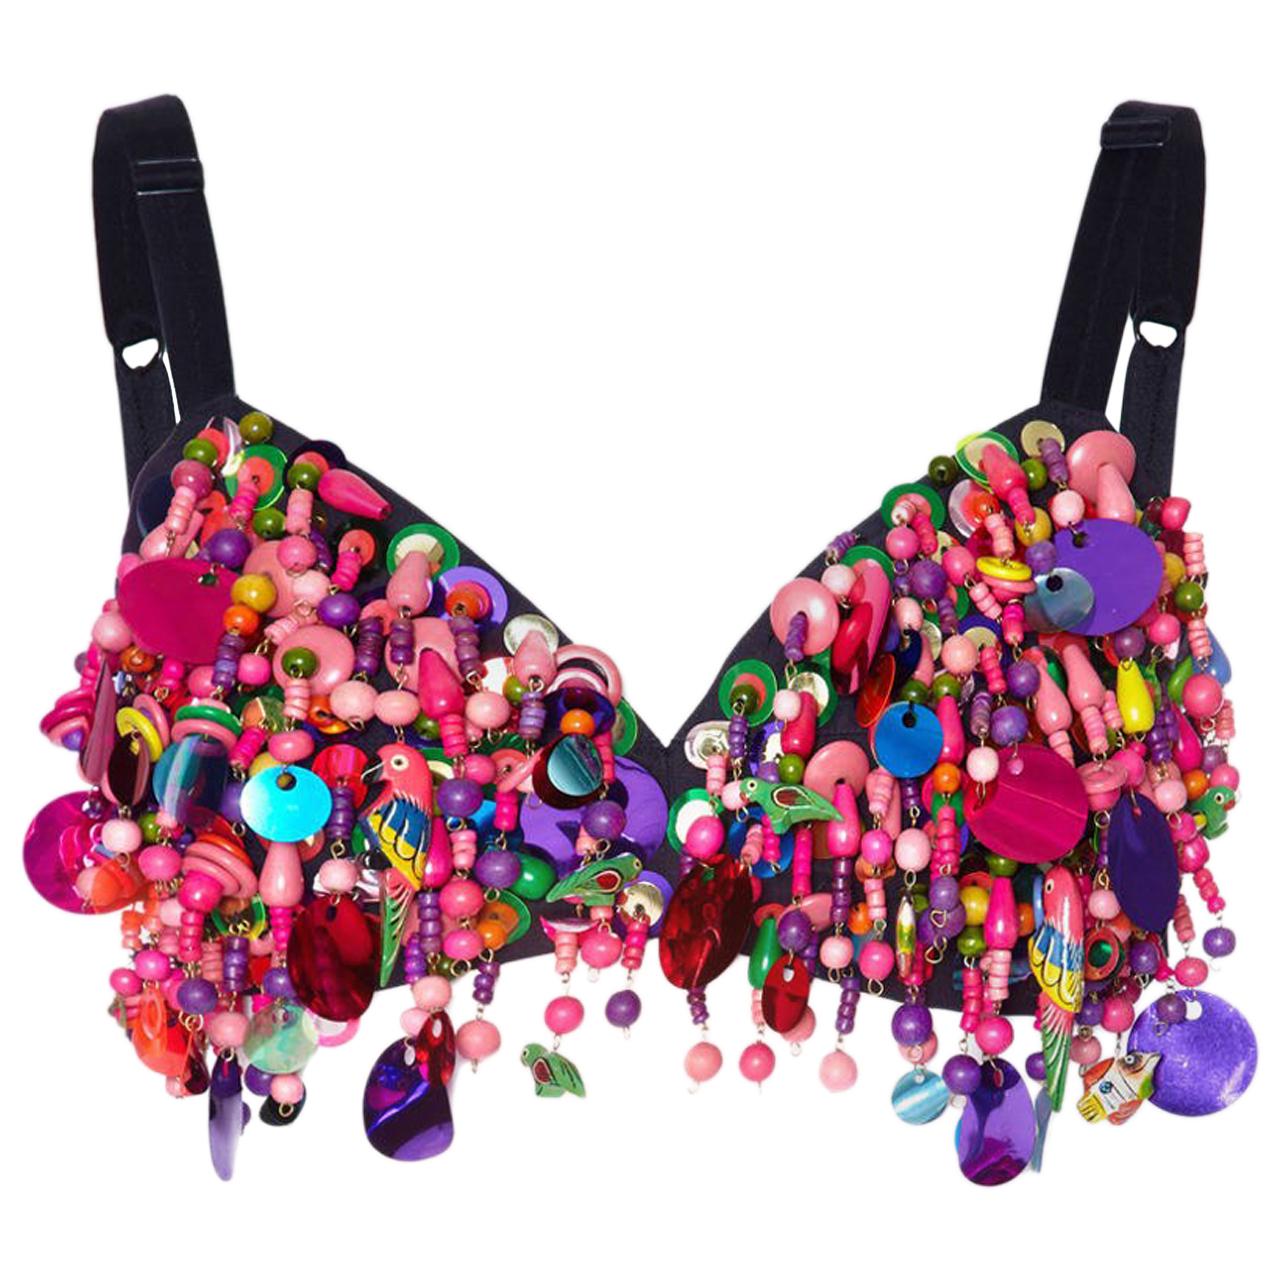 Collectable 1990s Dolce and Gabbana Runway Beaded Bra and Shirt Ensemble